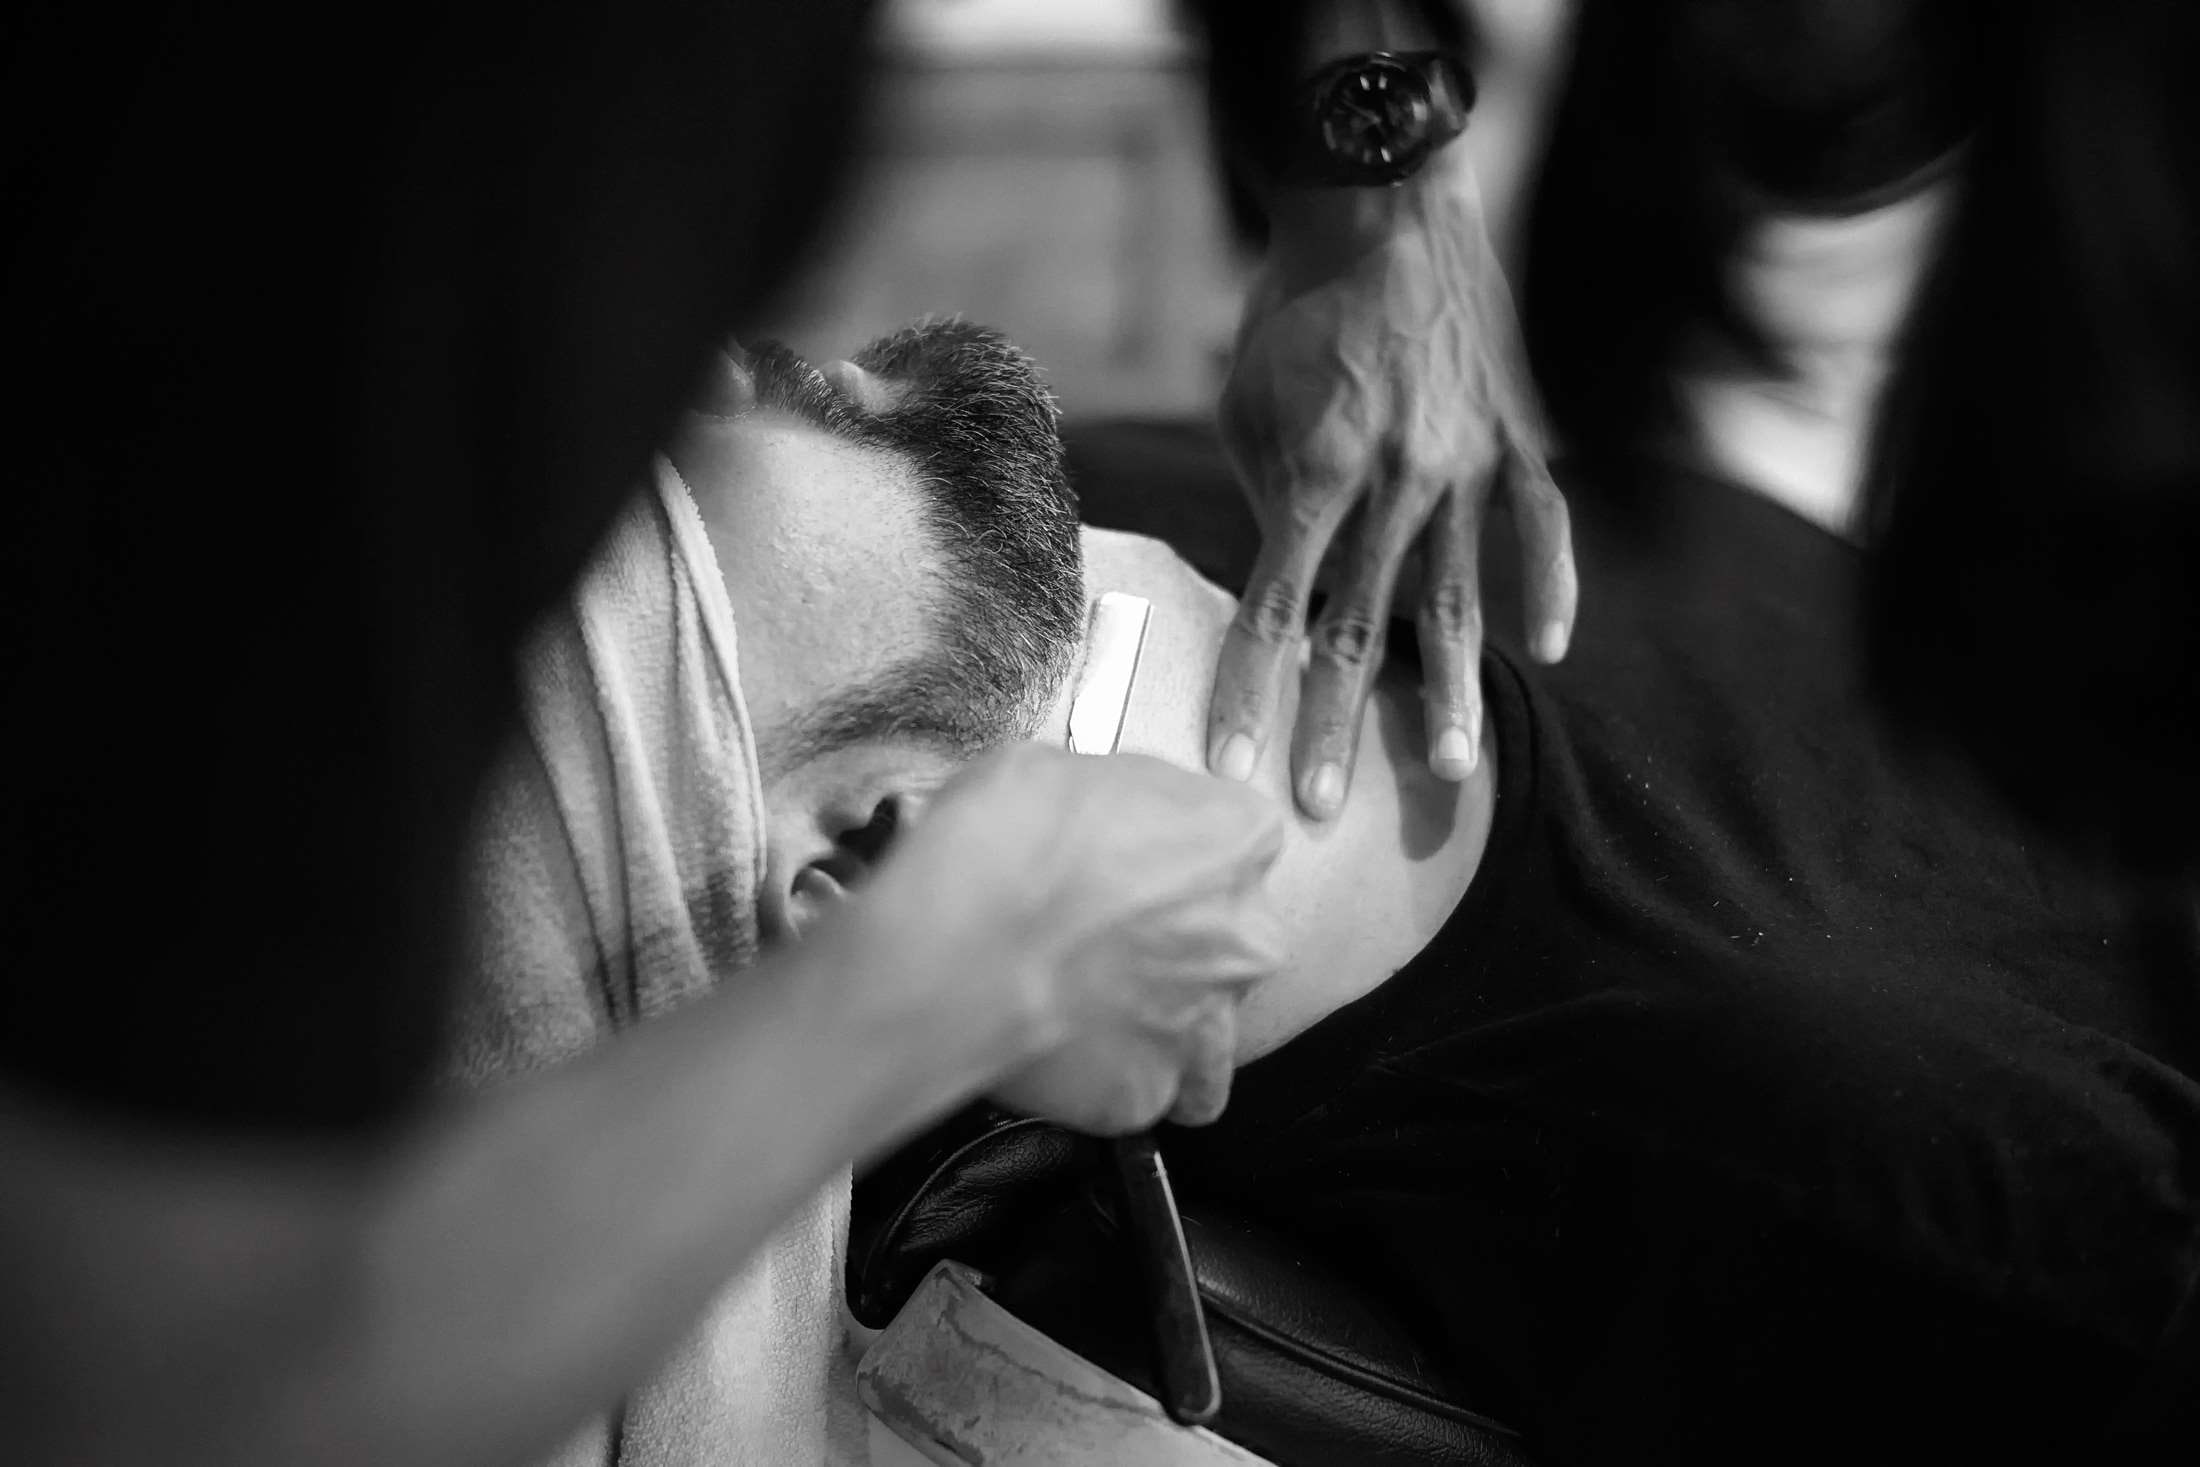 adult, barber, beard, black and white, blade, blur, business